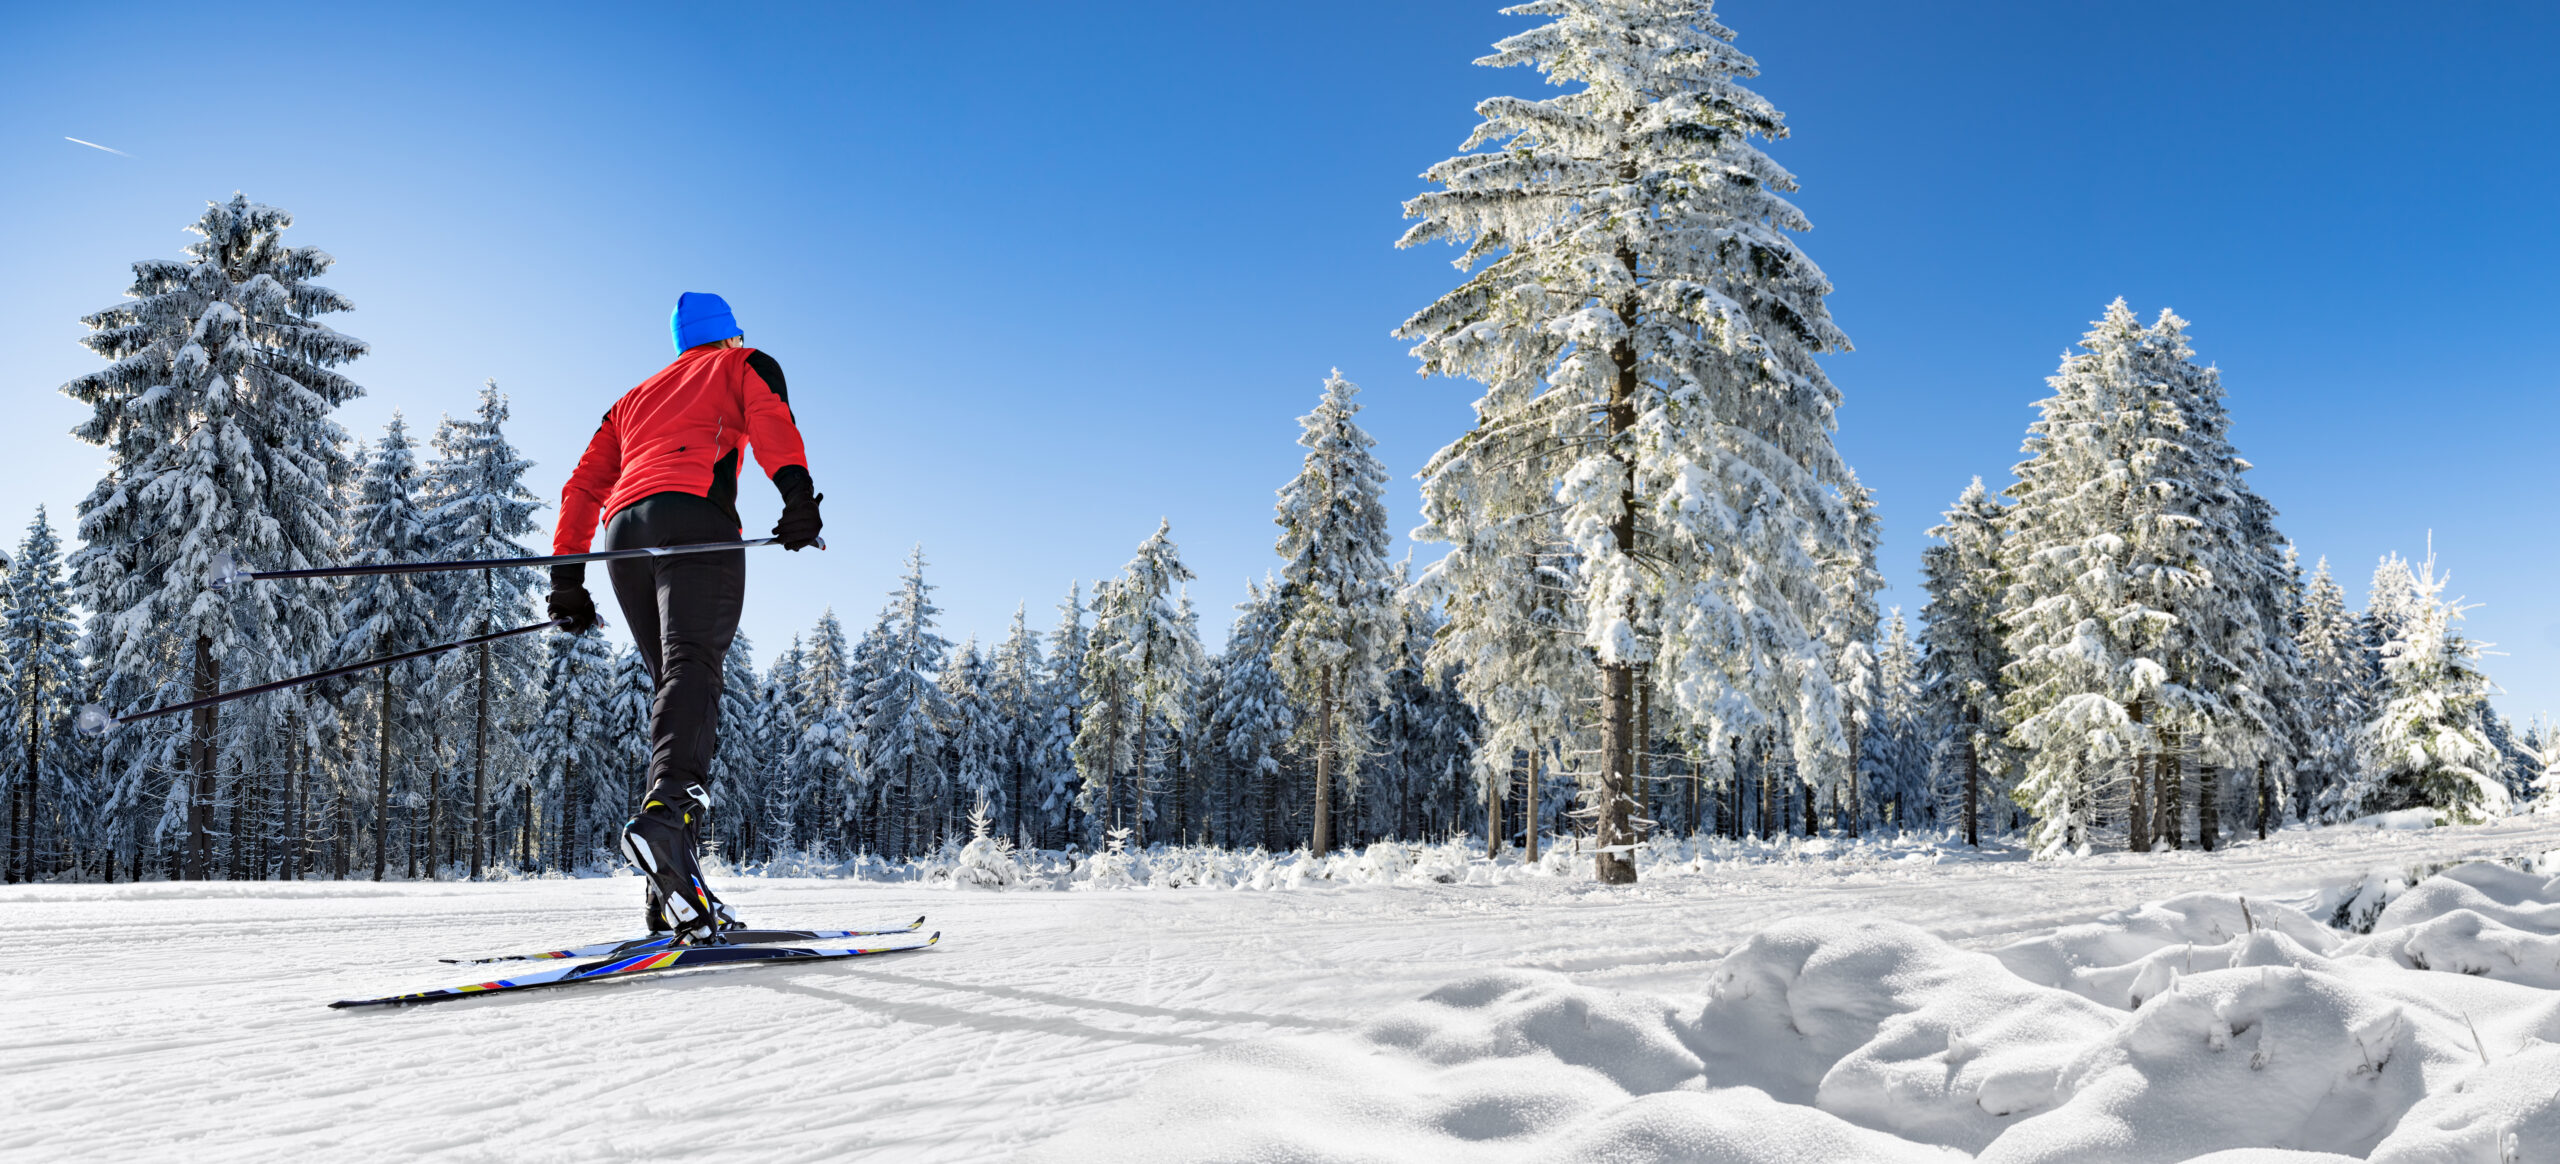 Preparing for Winter Sports: Winter Sports Safety